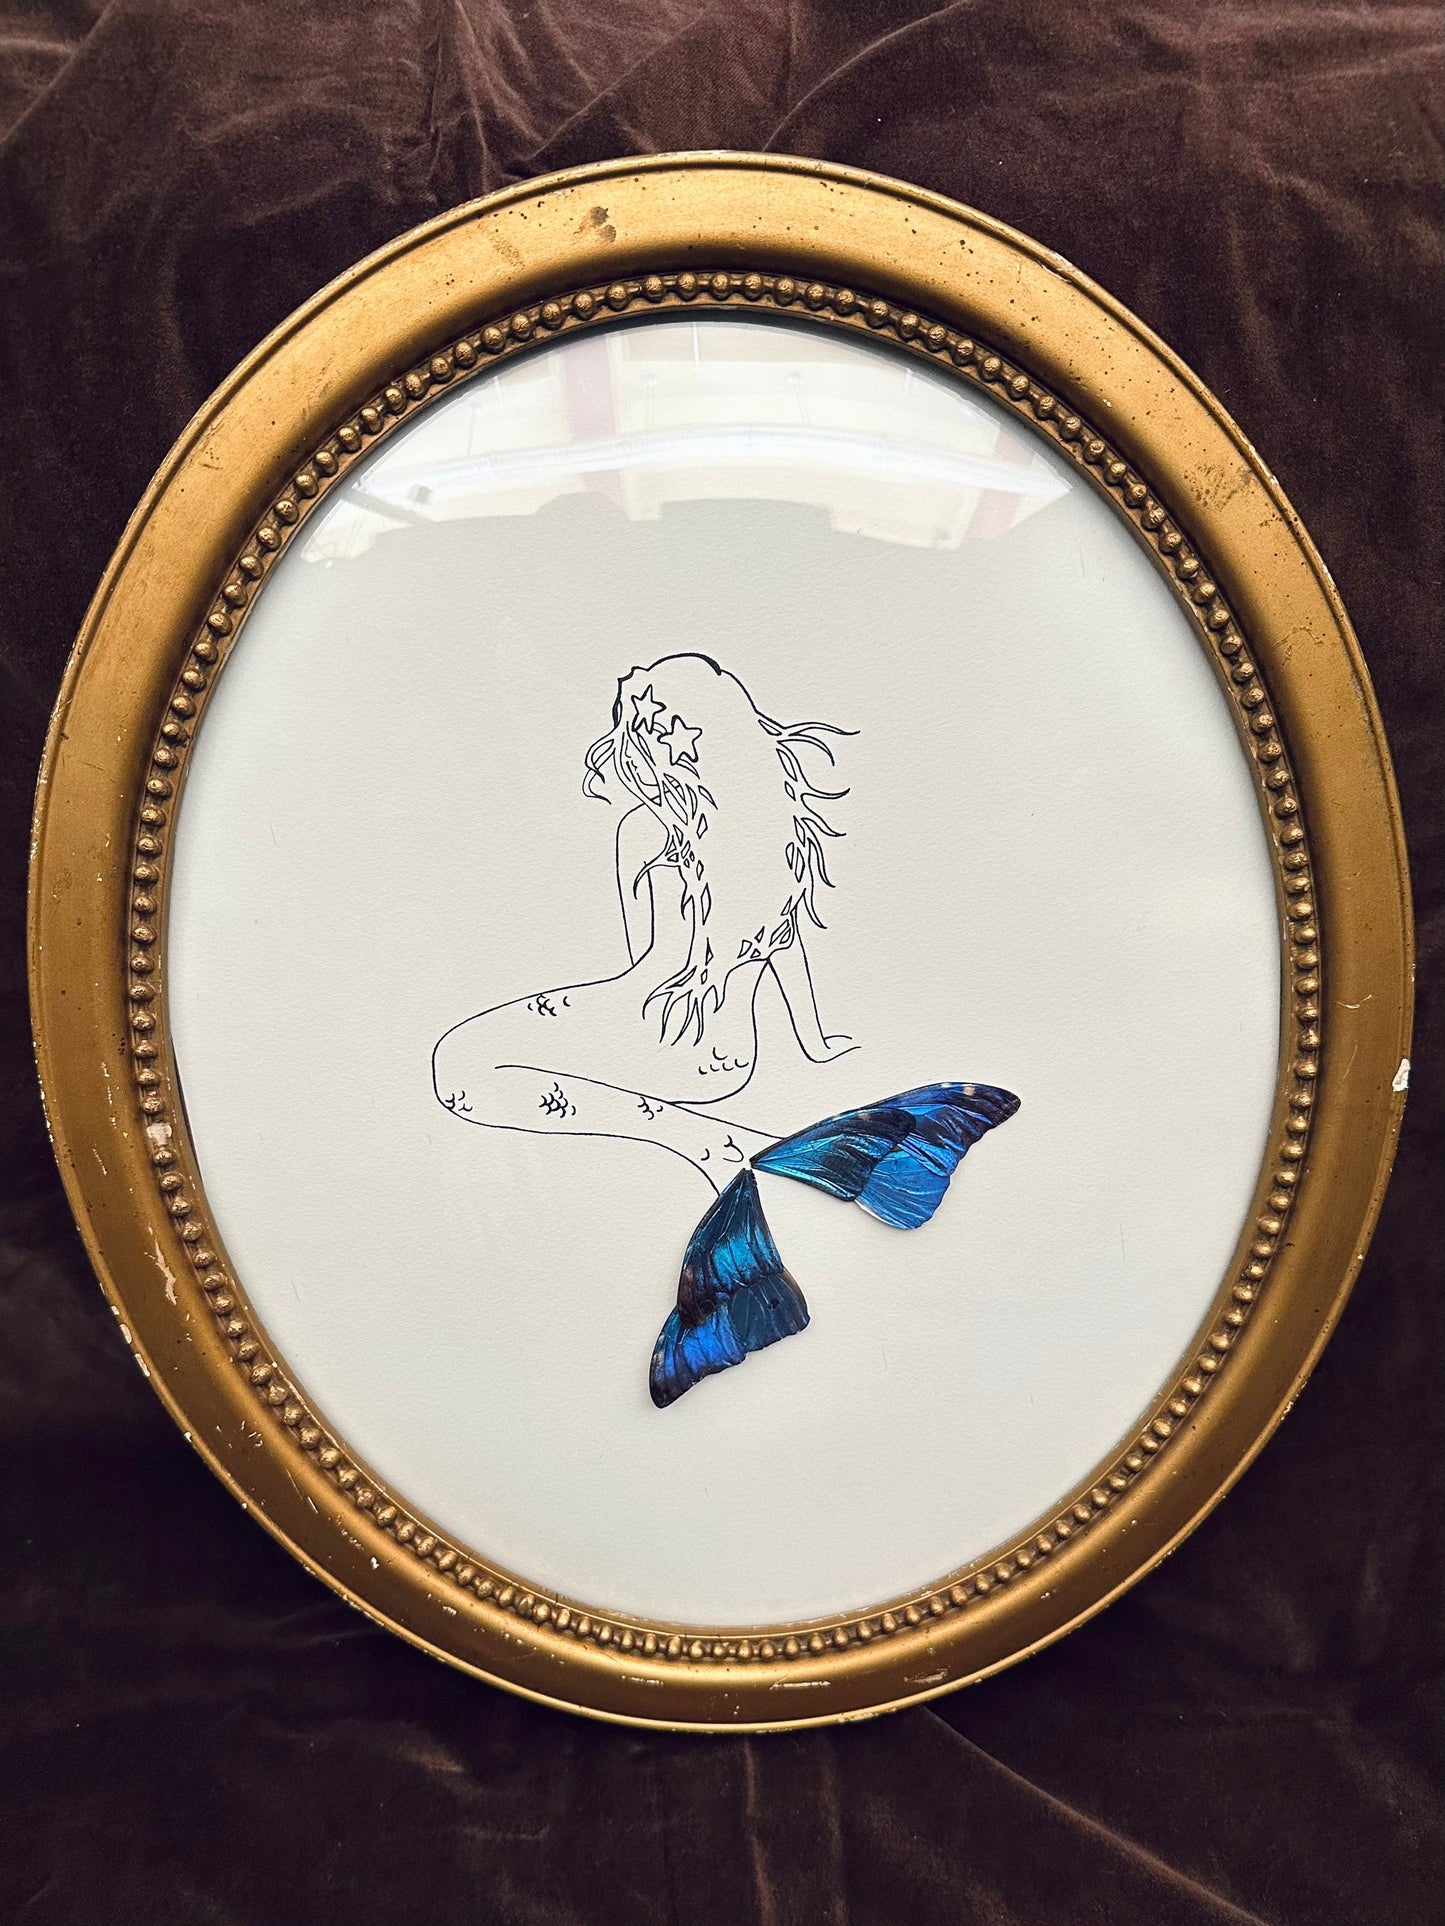 Mermaid Real Adonis Morpho (Morpho adonis) Butterfly Wings vintage bubble glass frame Ink Illustrations by Holly Ulm